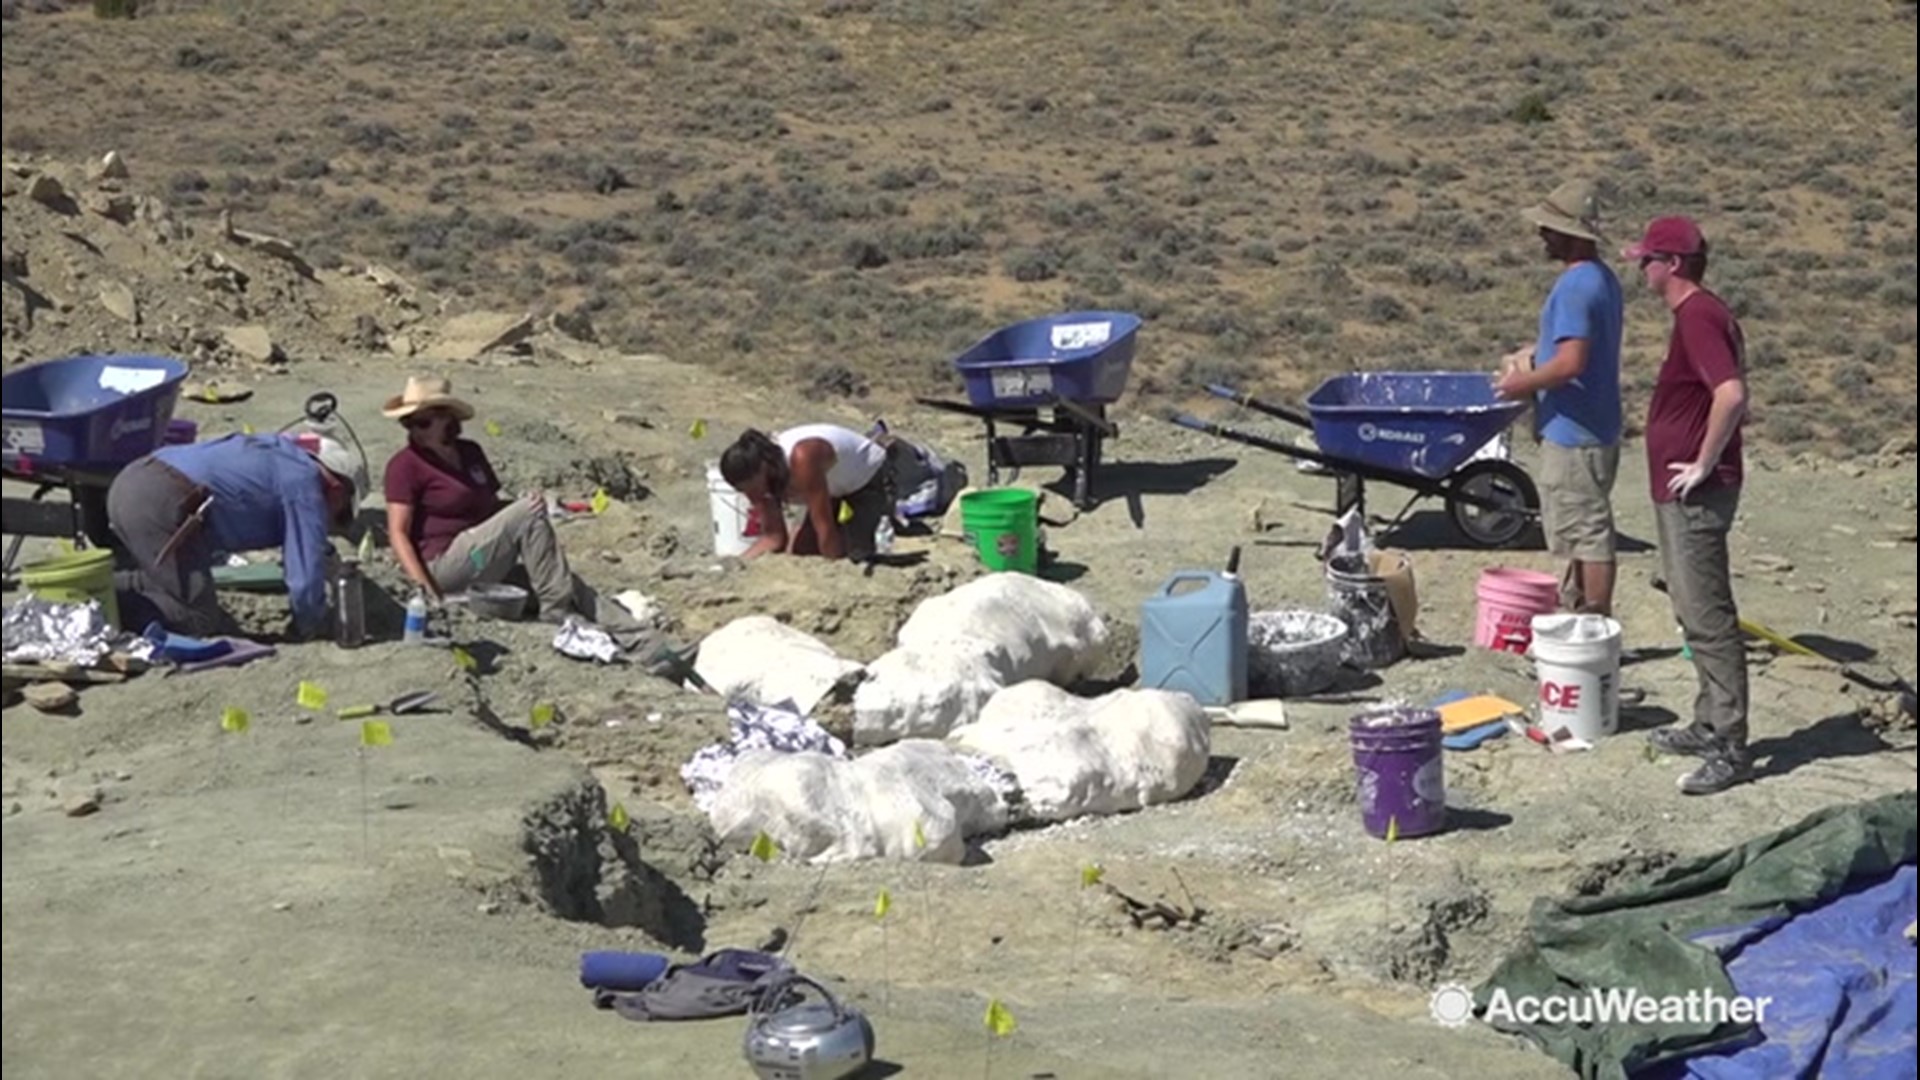 On any given day in the middle of summer, in the rugged terrain of the Big Horn Basin, near Cody, Wyoming, you'll find a team of paleontologists digging away on the Jurassic Mile dig site, unearthing dinosaur fossils that are more than 150 million years old. Here's a look at how weather impacts the process of finding and recovering these ancient fossils.